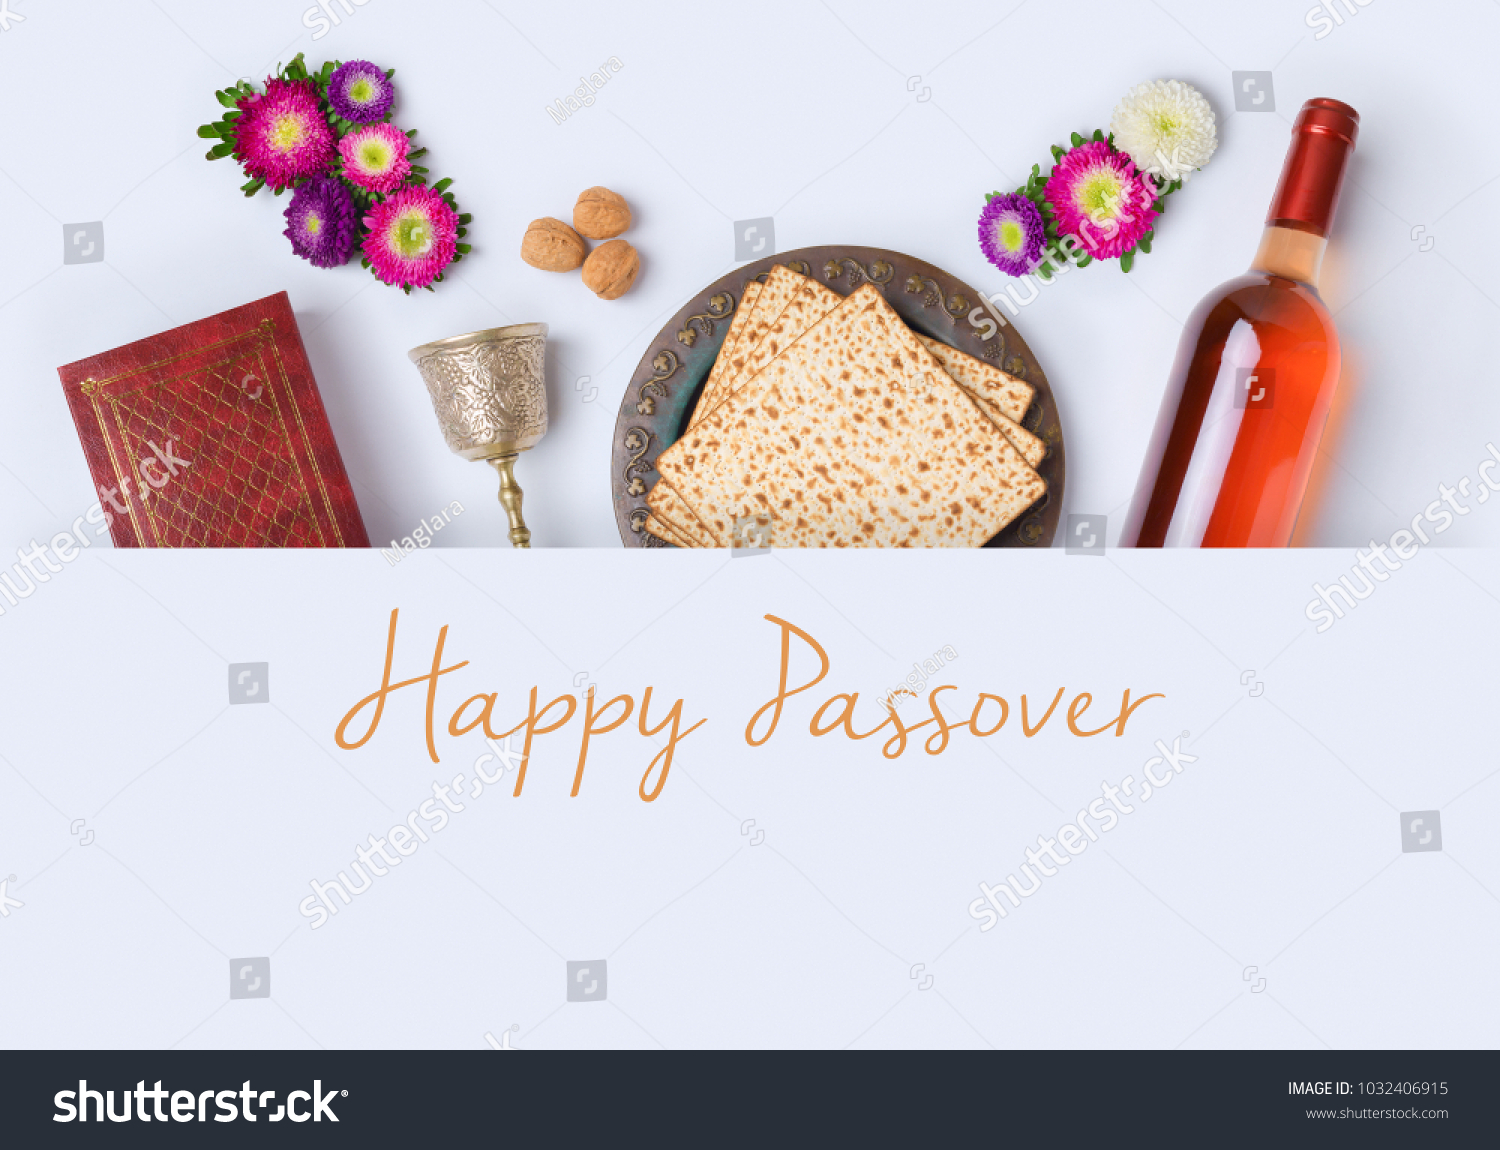 Jewish holiday Passover banner design with wine, matzo and seder plate on white background. View from above. Flat lay #1032406915